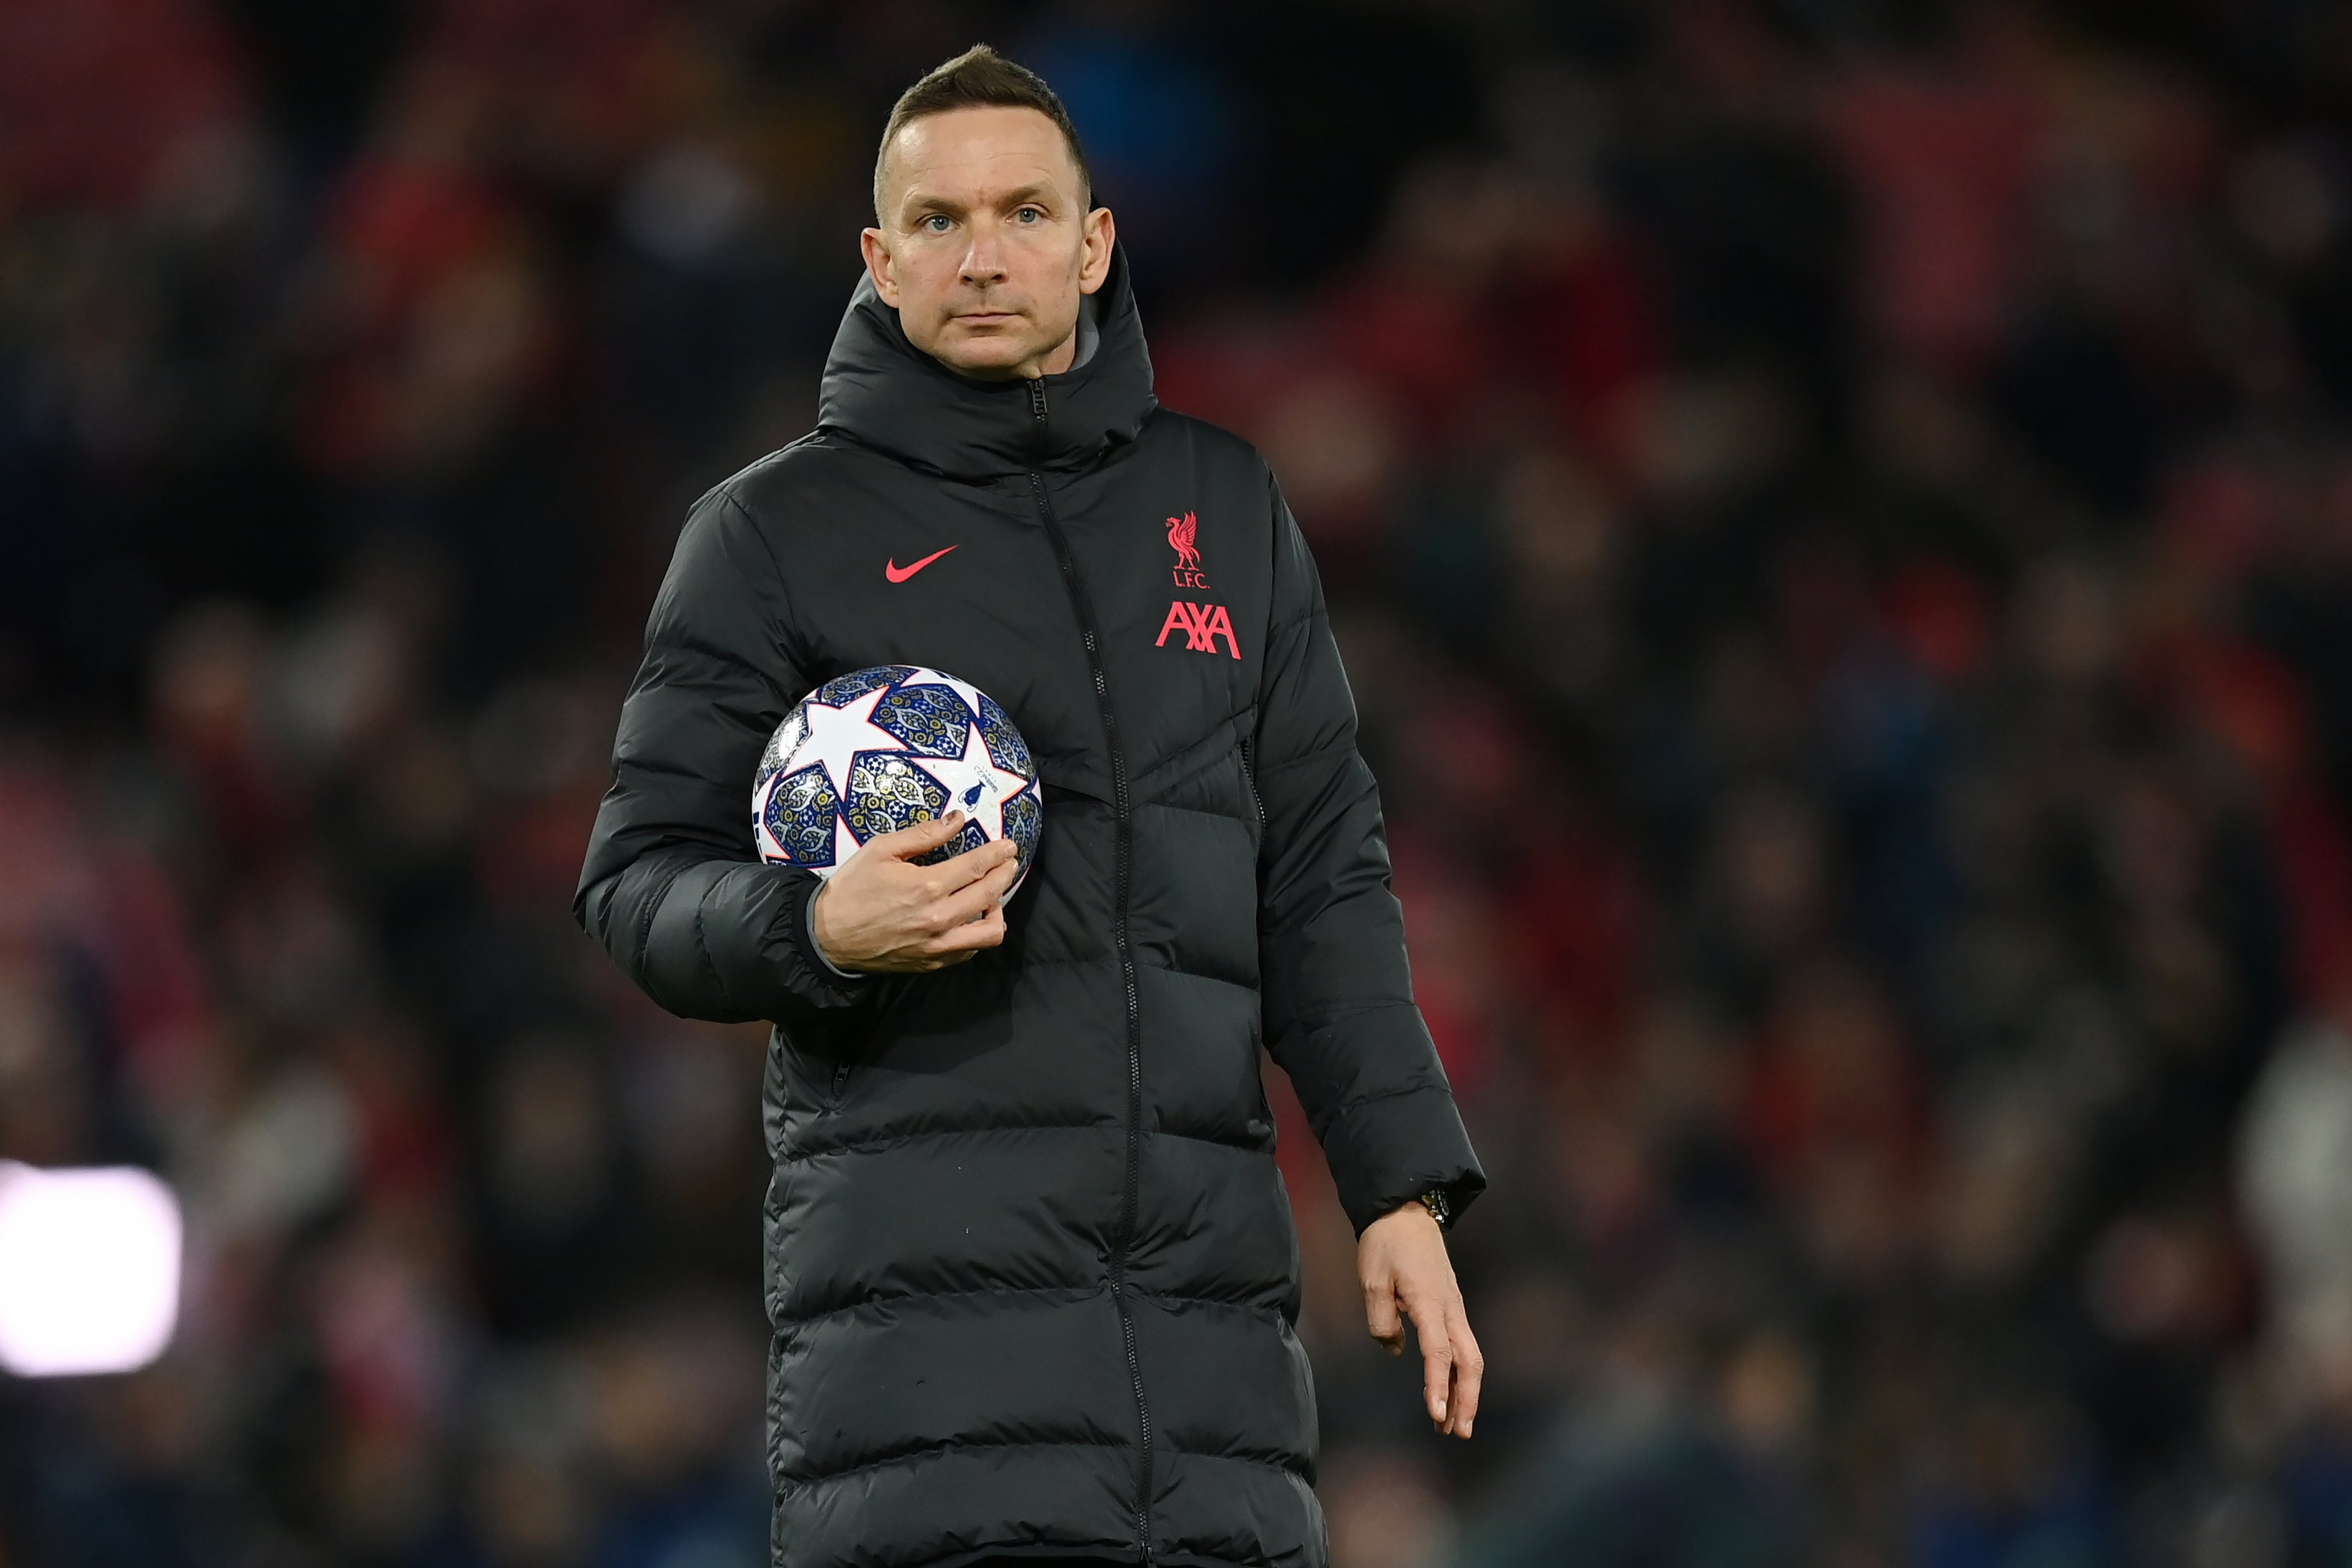 Pep Lijnders will move to Salzburg when he leaves Liverpool this summer